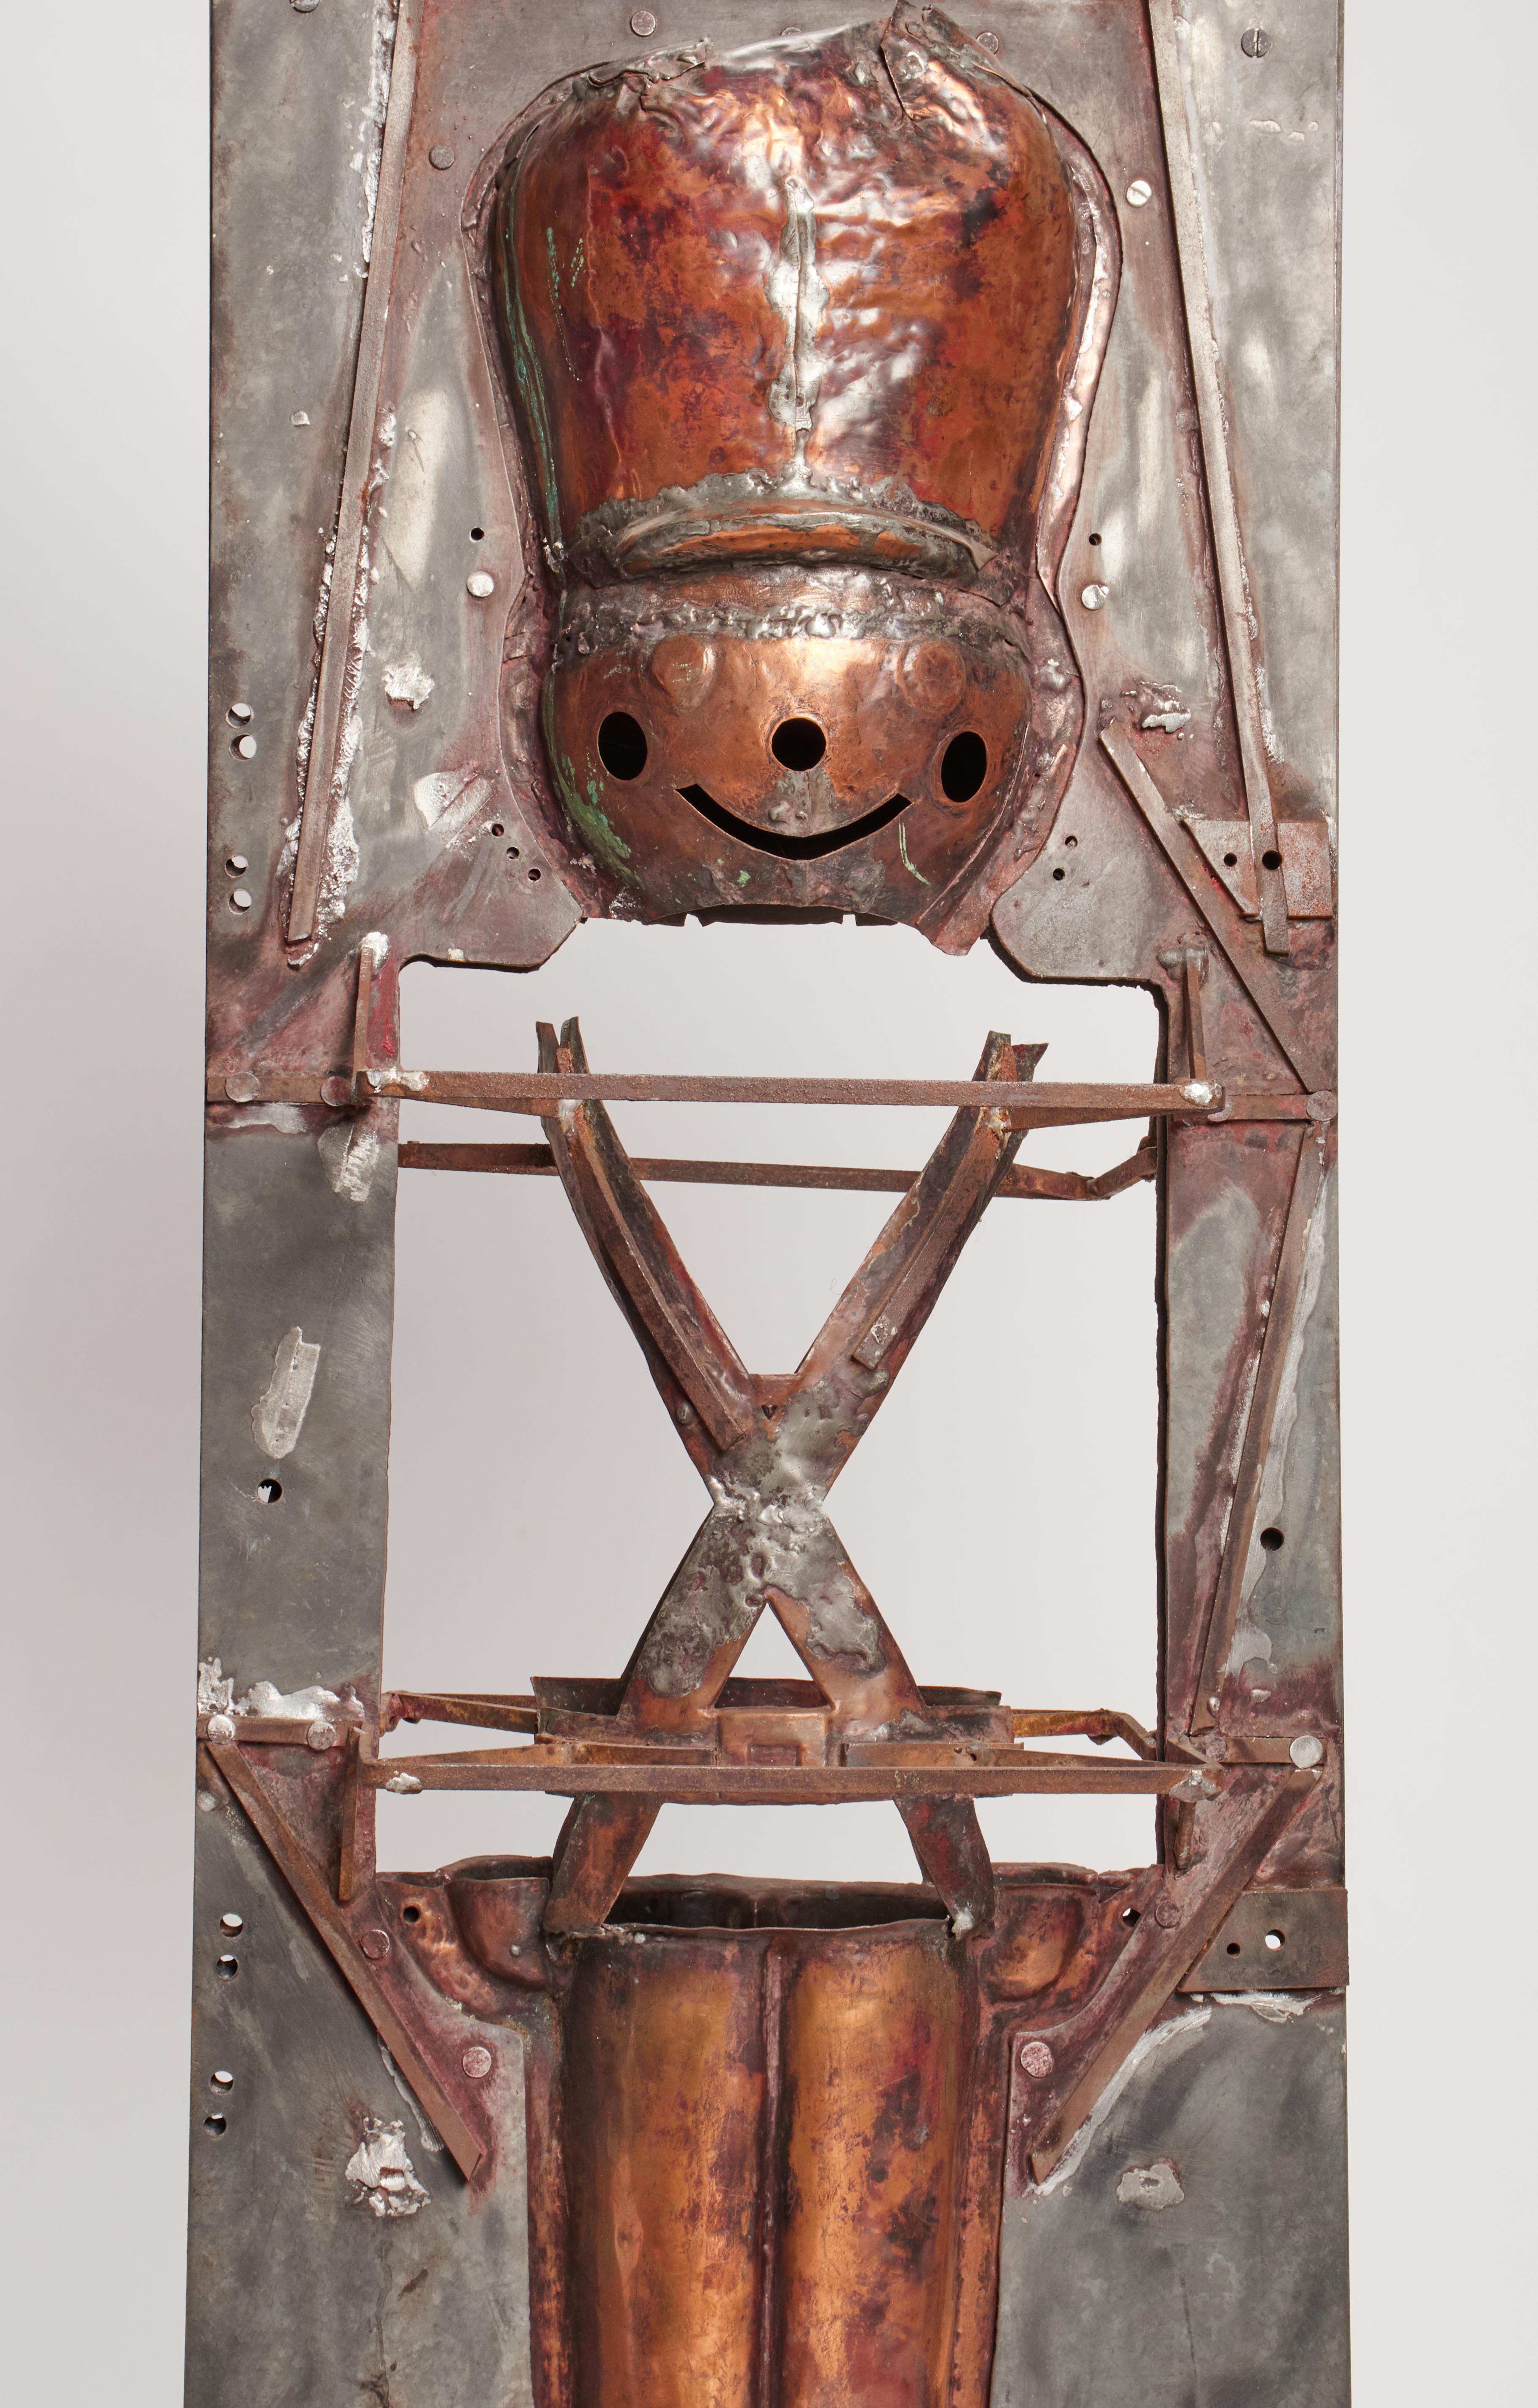 Iron and copper mold for a toy depicting a soldier. USA 1900 ca.